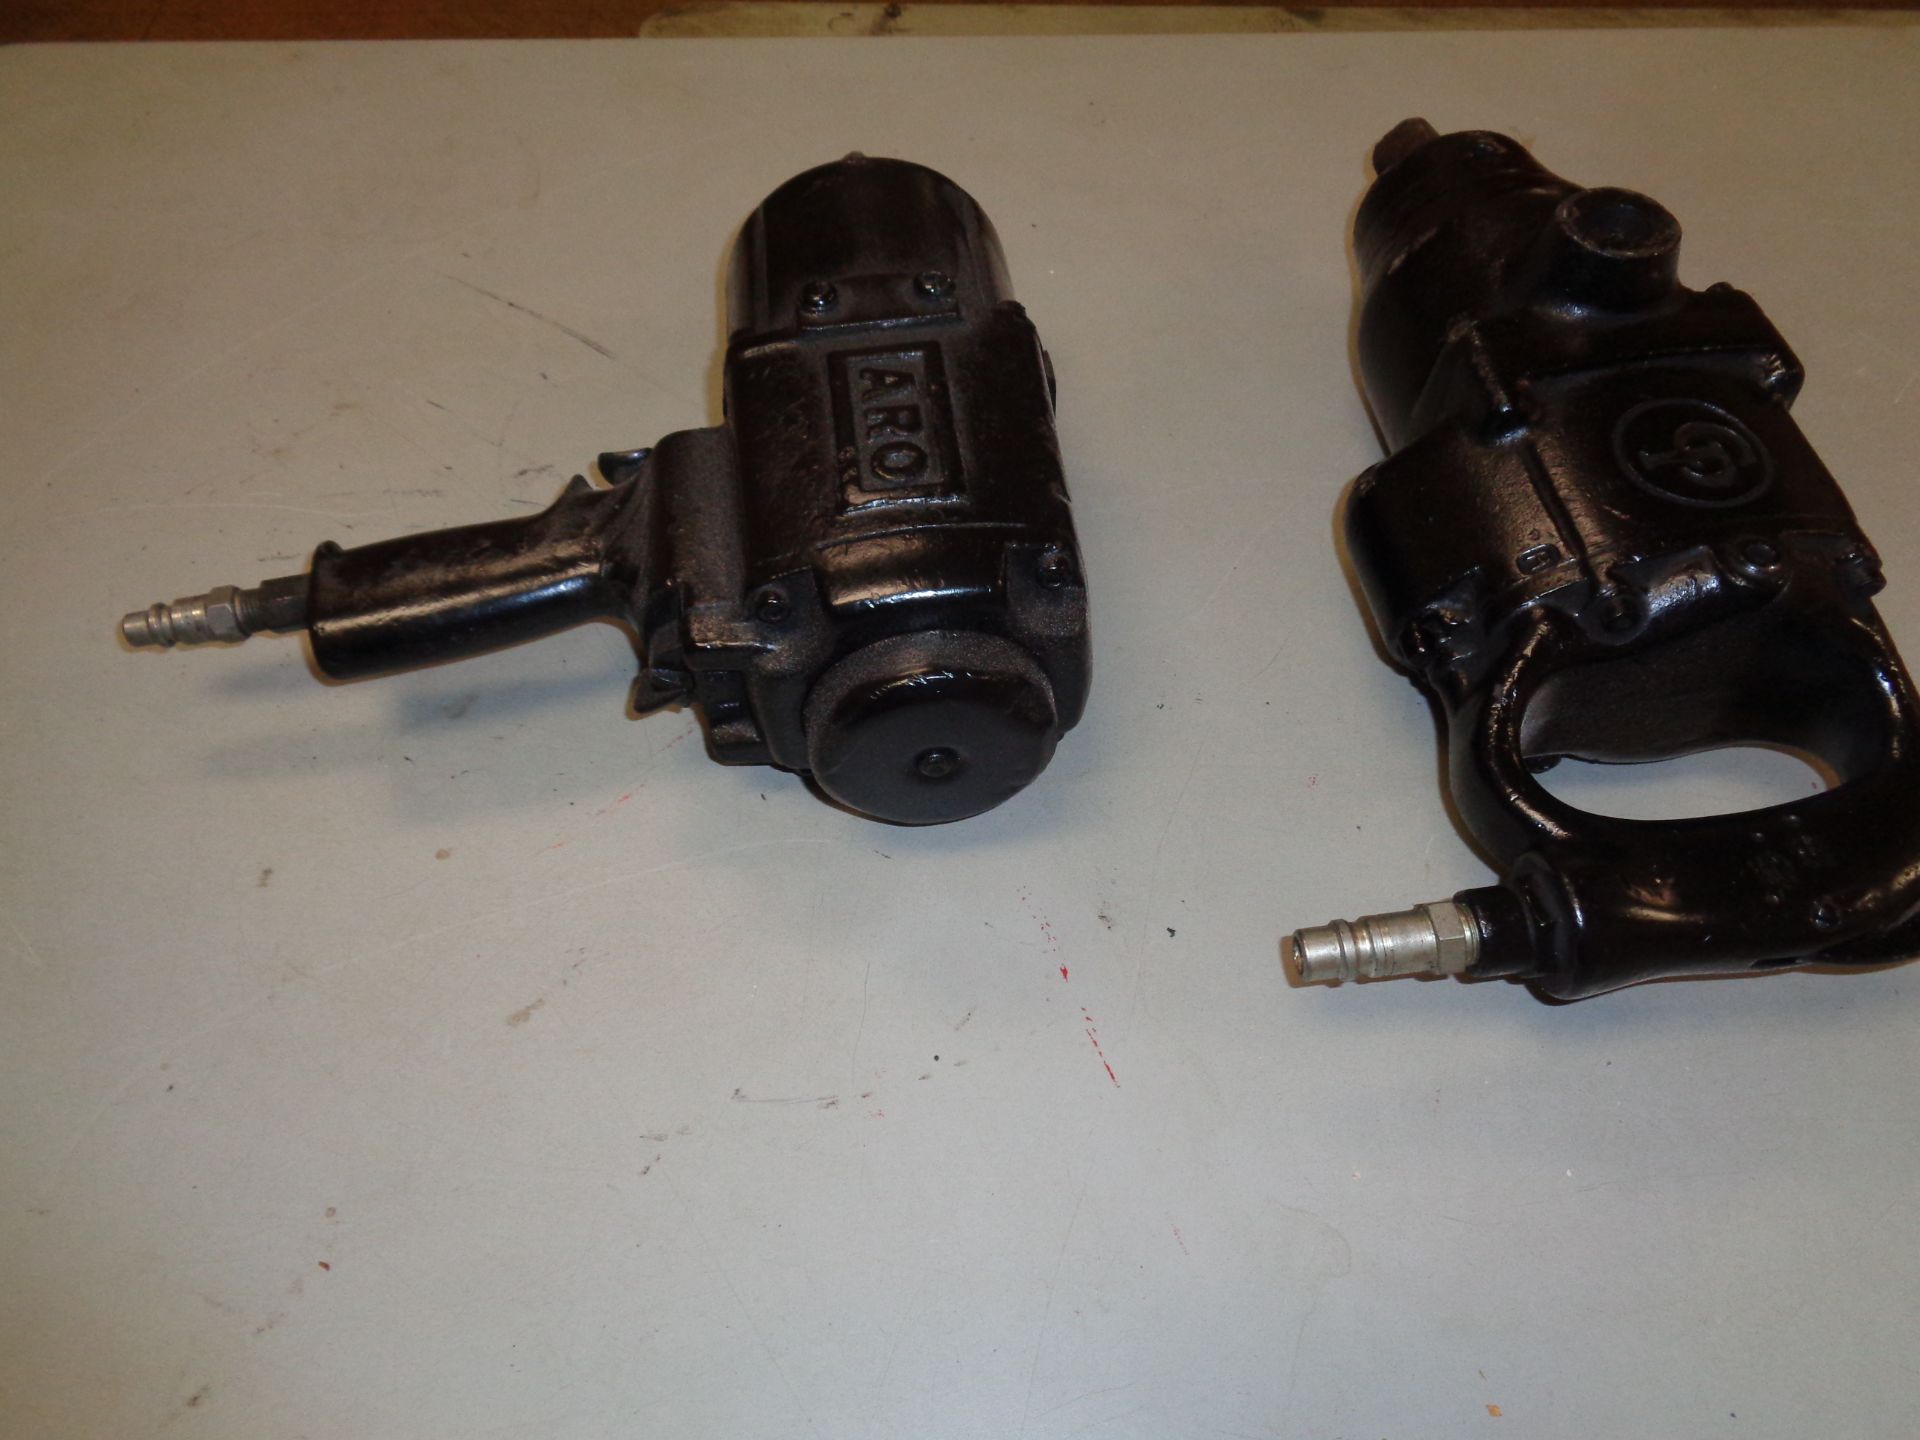 Lot of 2 3/4in Drive Impact Guns - Image 3 of 5